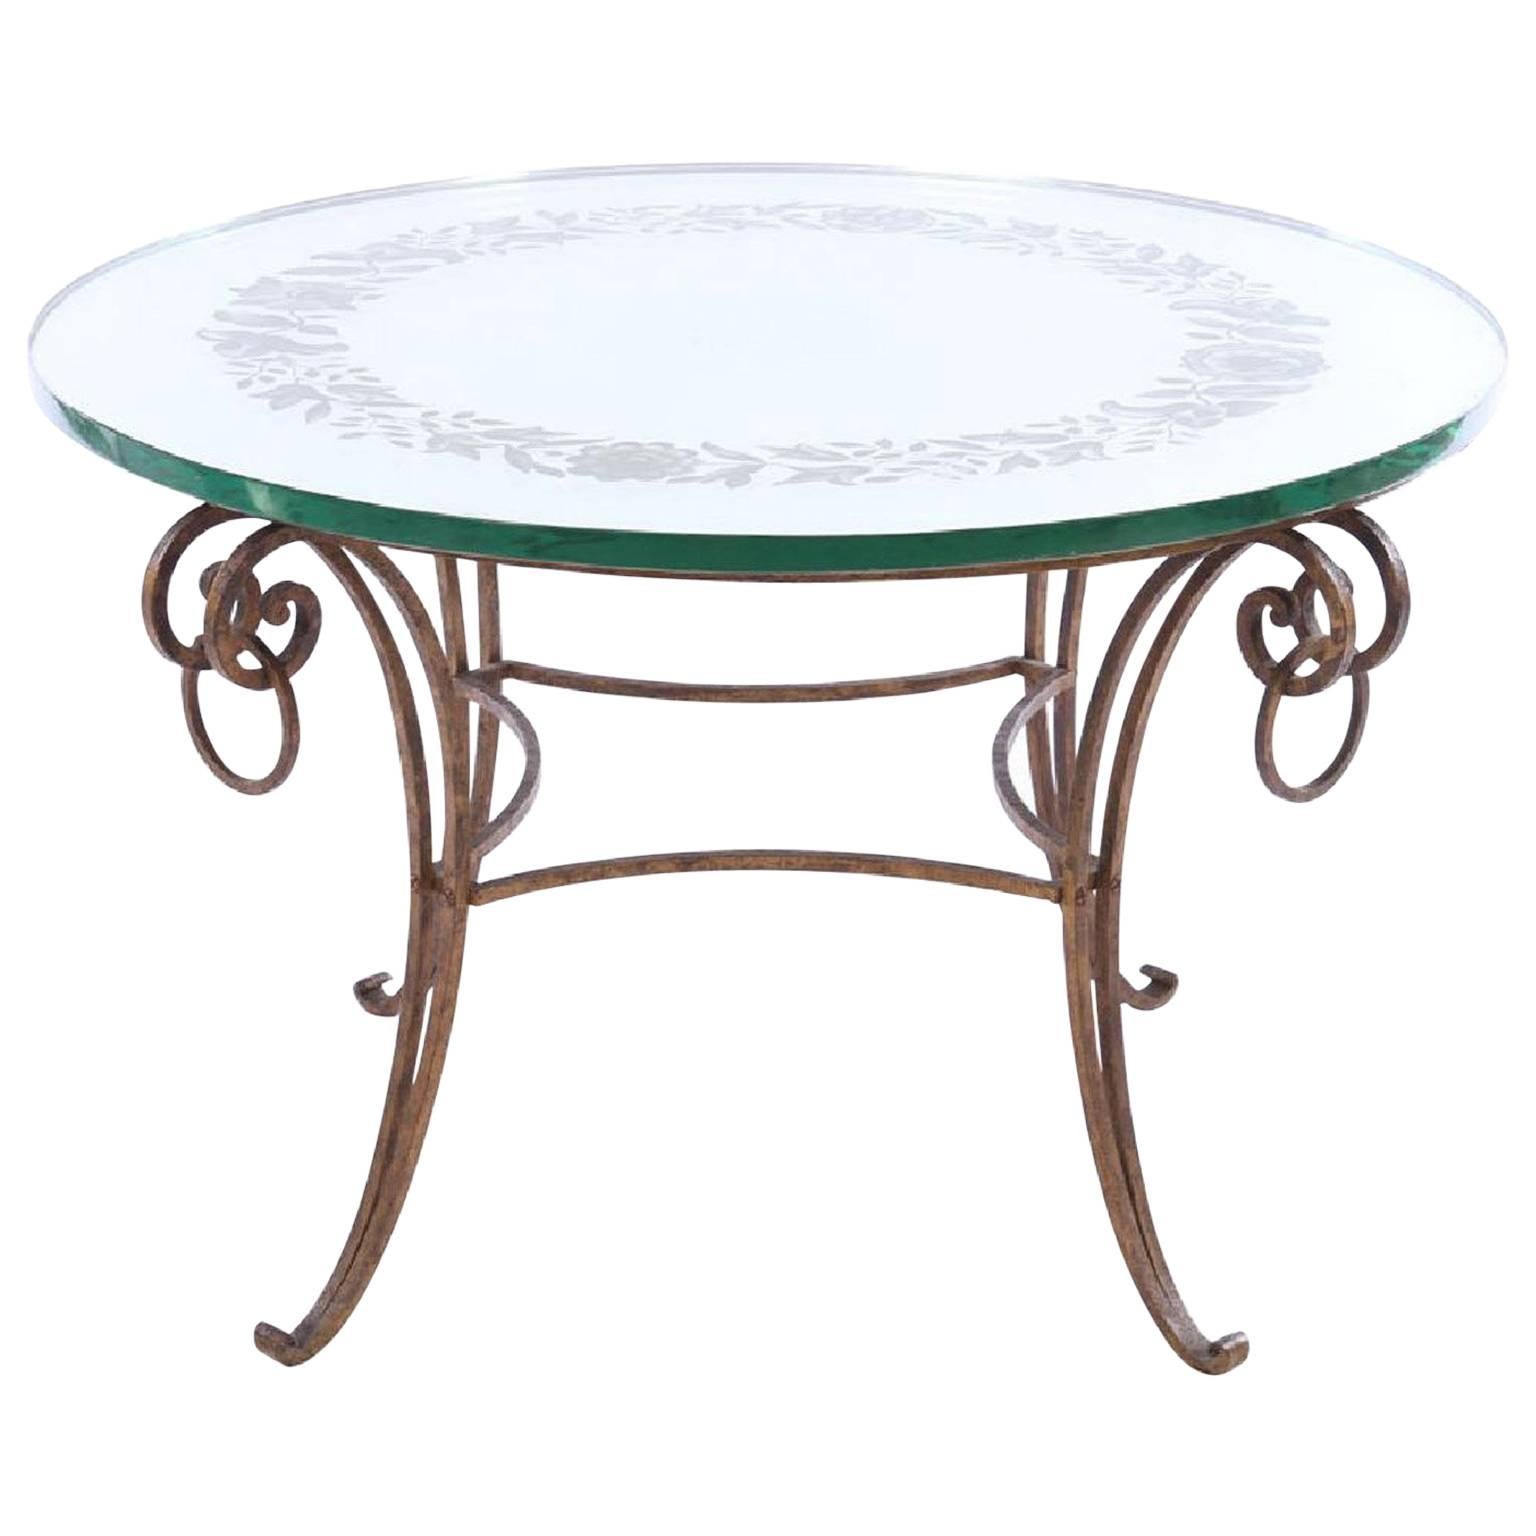 French Mirrored Coffee Table, style of Rene Drouet with Wrought Iron Base For Sale